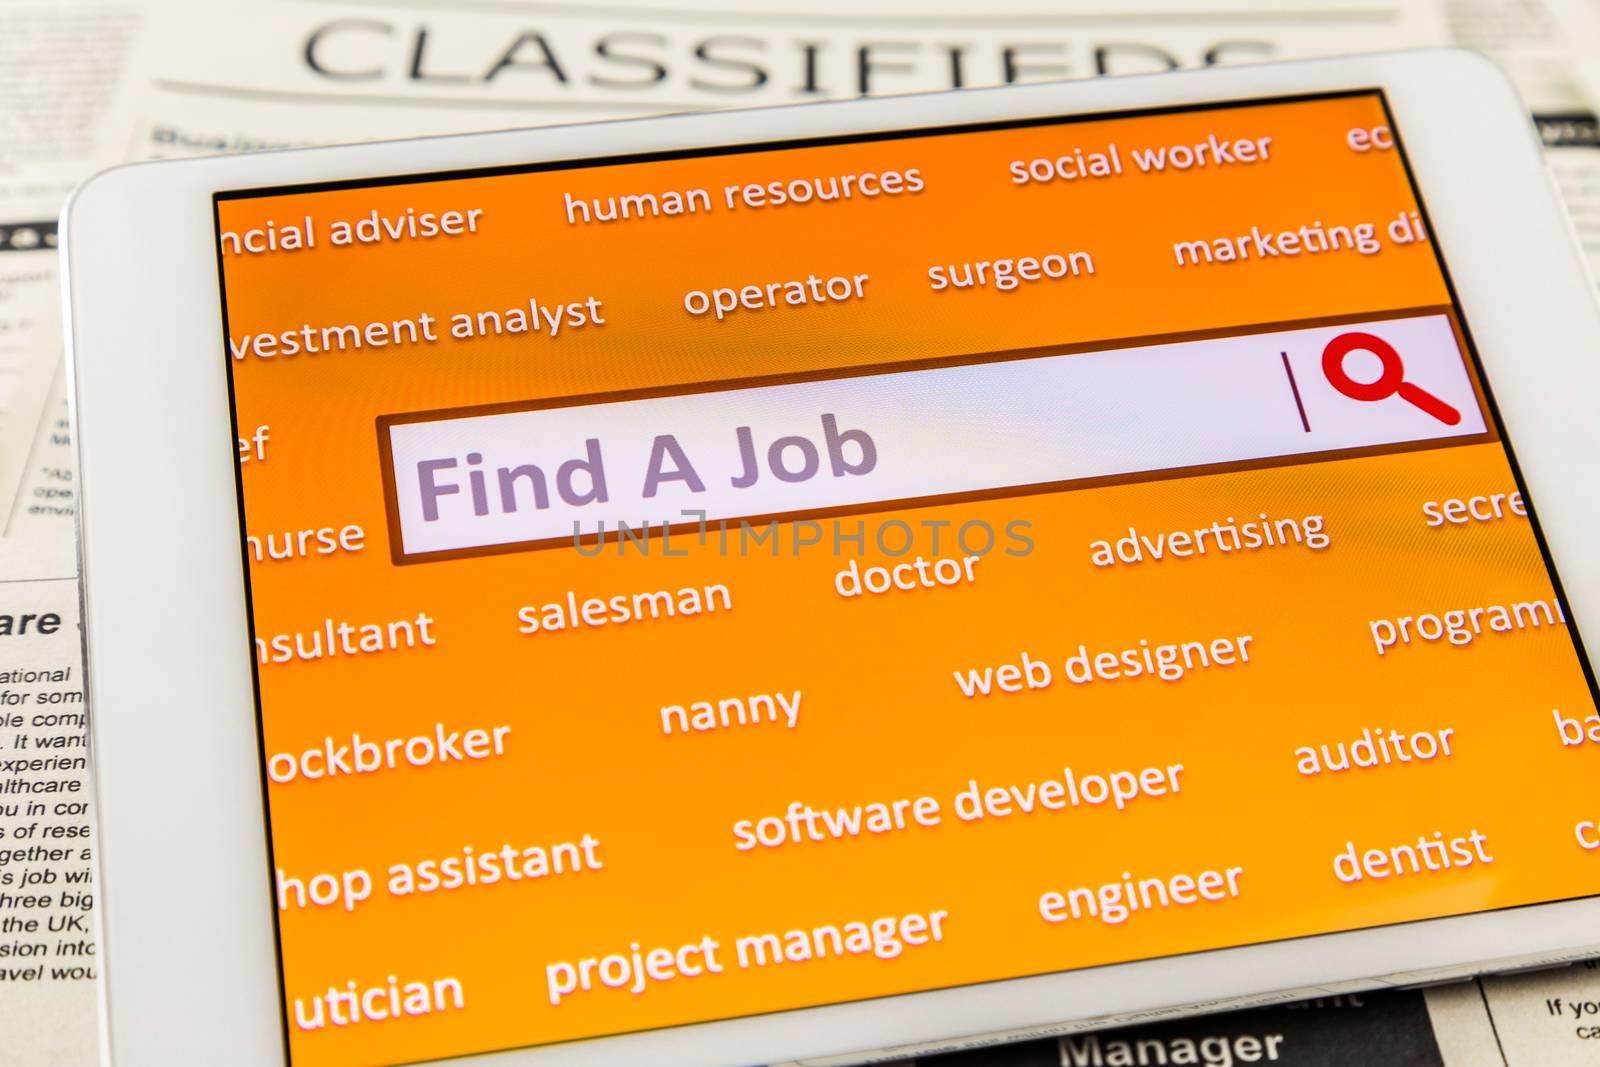 Use tablet search a job or  new career  by vinnstock